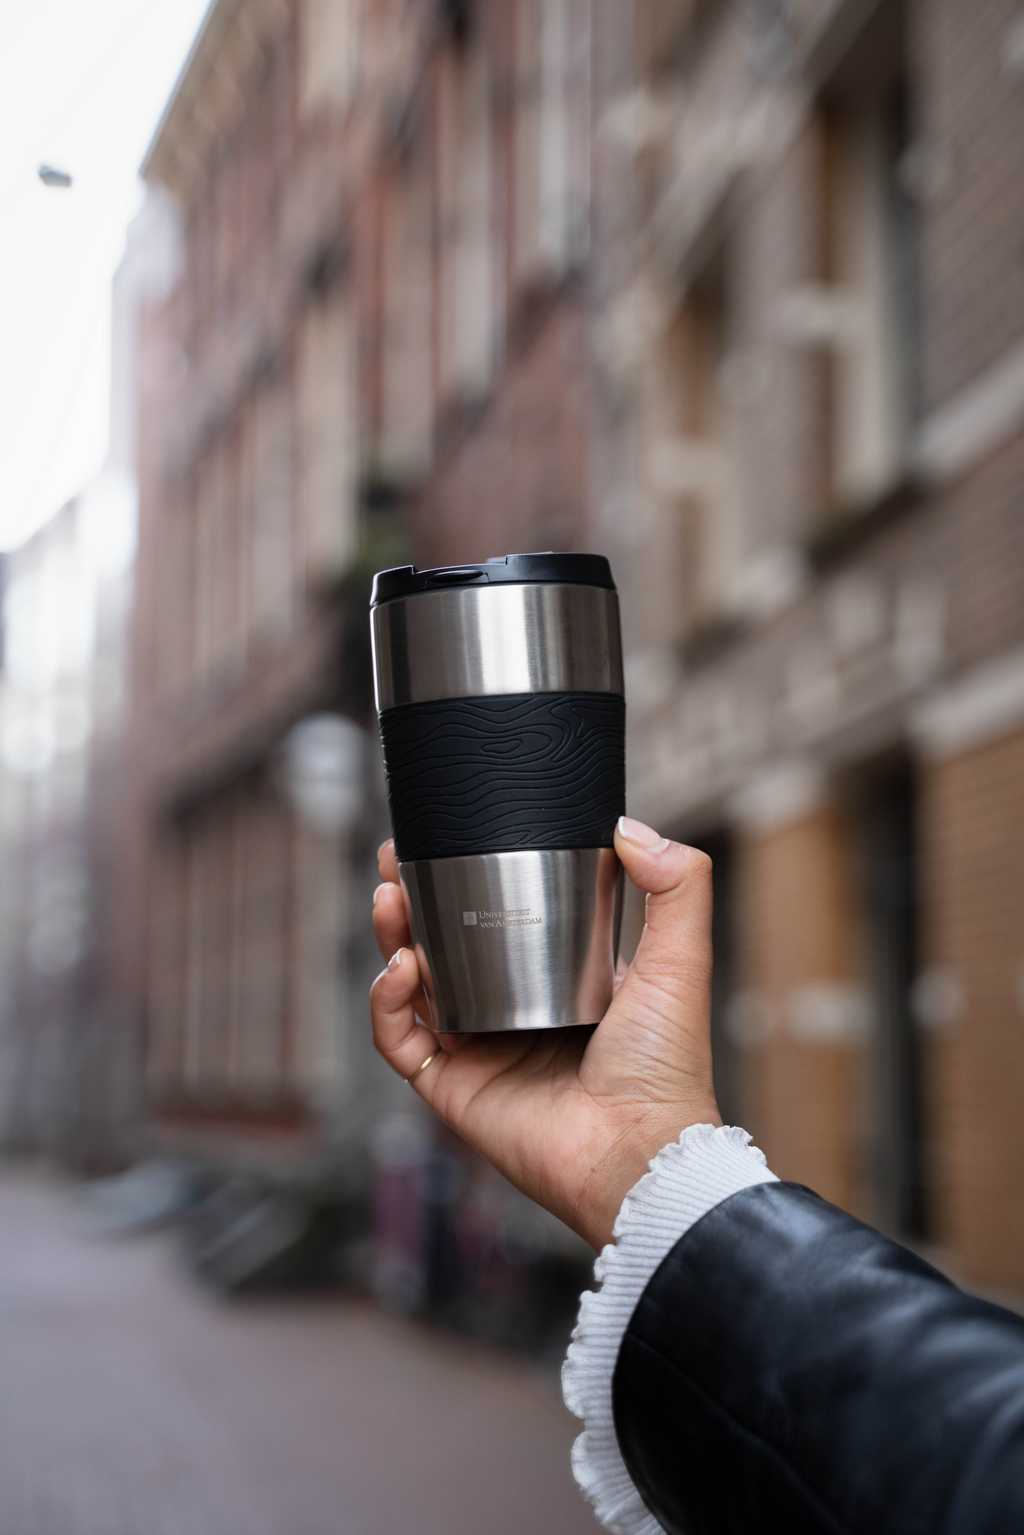 Stainless steel thermos cup with the University of Amsterdam logo